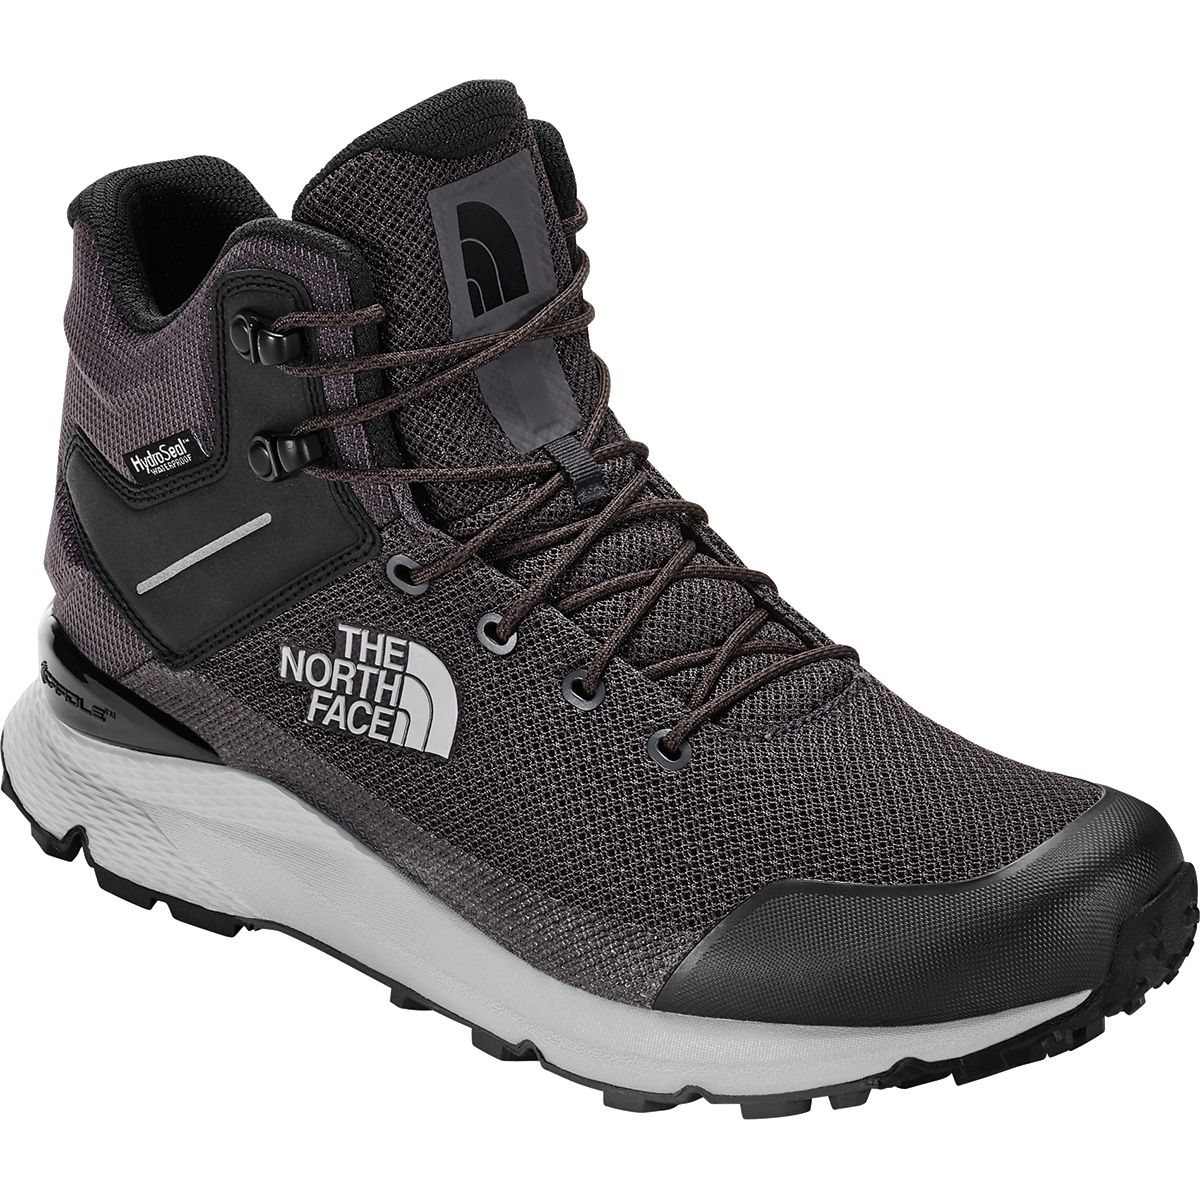 the north face men's vals mid waterproof hiking boots